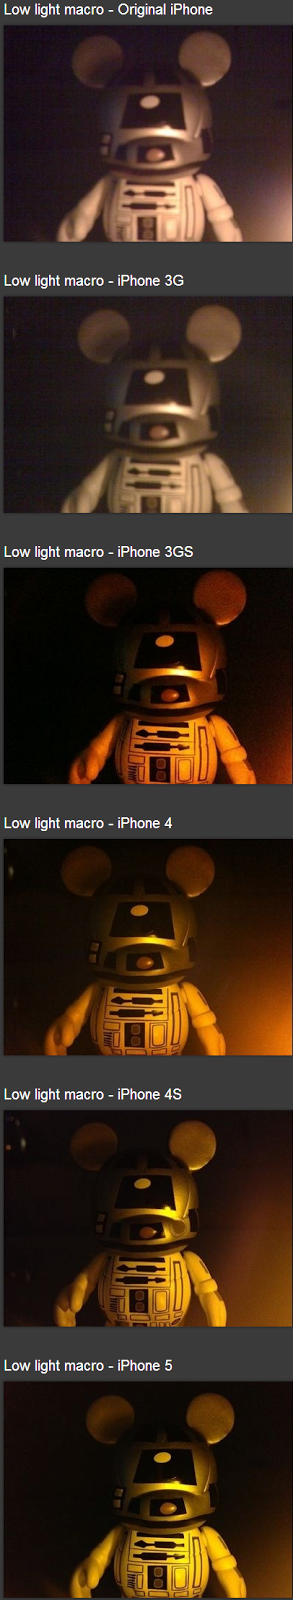 iPhone 5 Camera Image Quality Check with Old iPhone Models